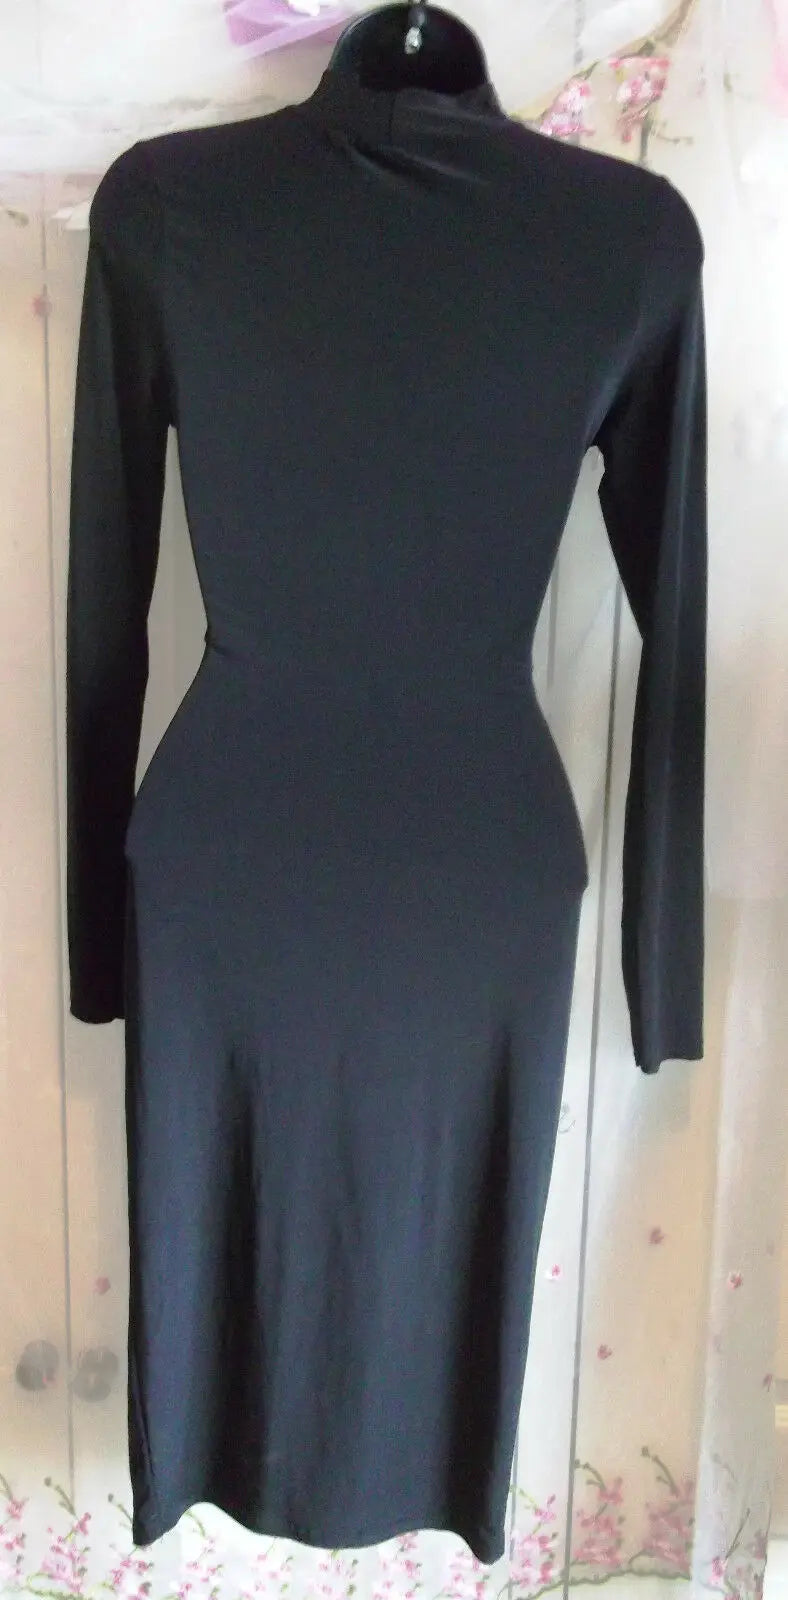 Missguided Black Dress Size 6 Ling Sleeve Body Con Knee Length Missguided